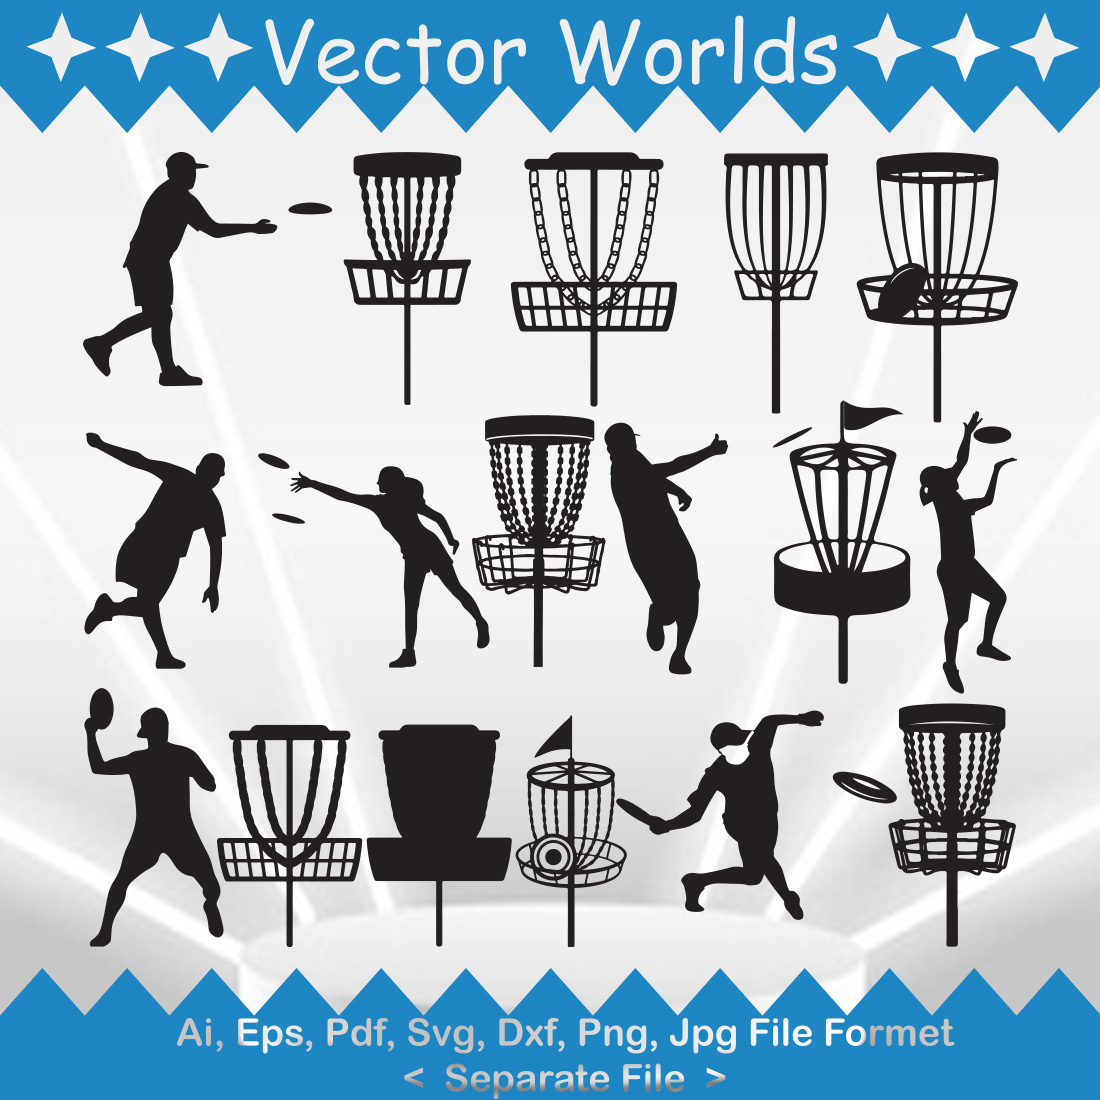 A selection of adorable images of basket silhouettes for Disc Golf